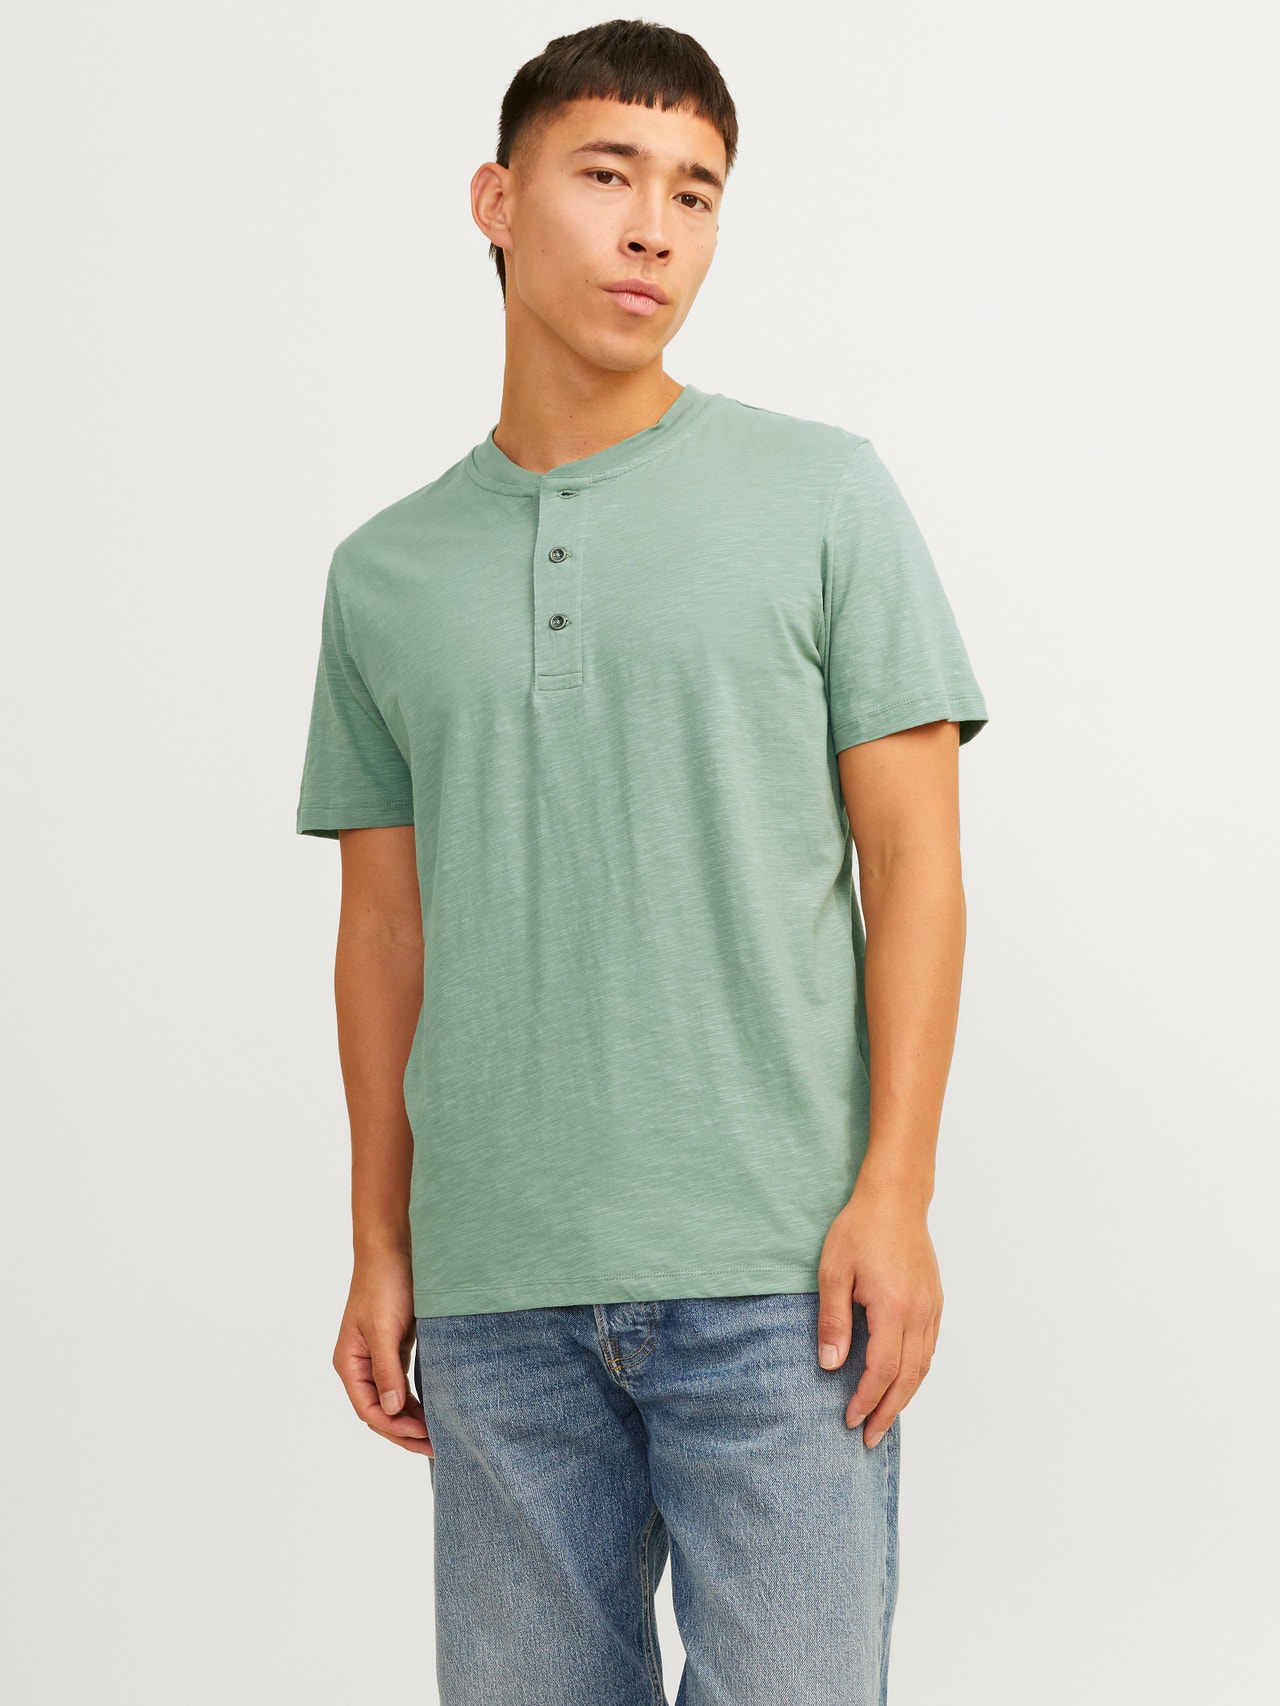 Jack & Jones T-shirt Semplice Colletto Cinese -Lily Pad - 12257965